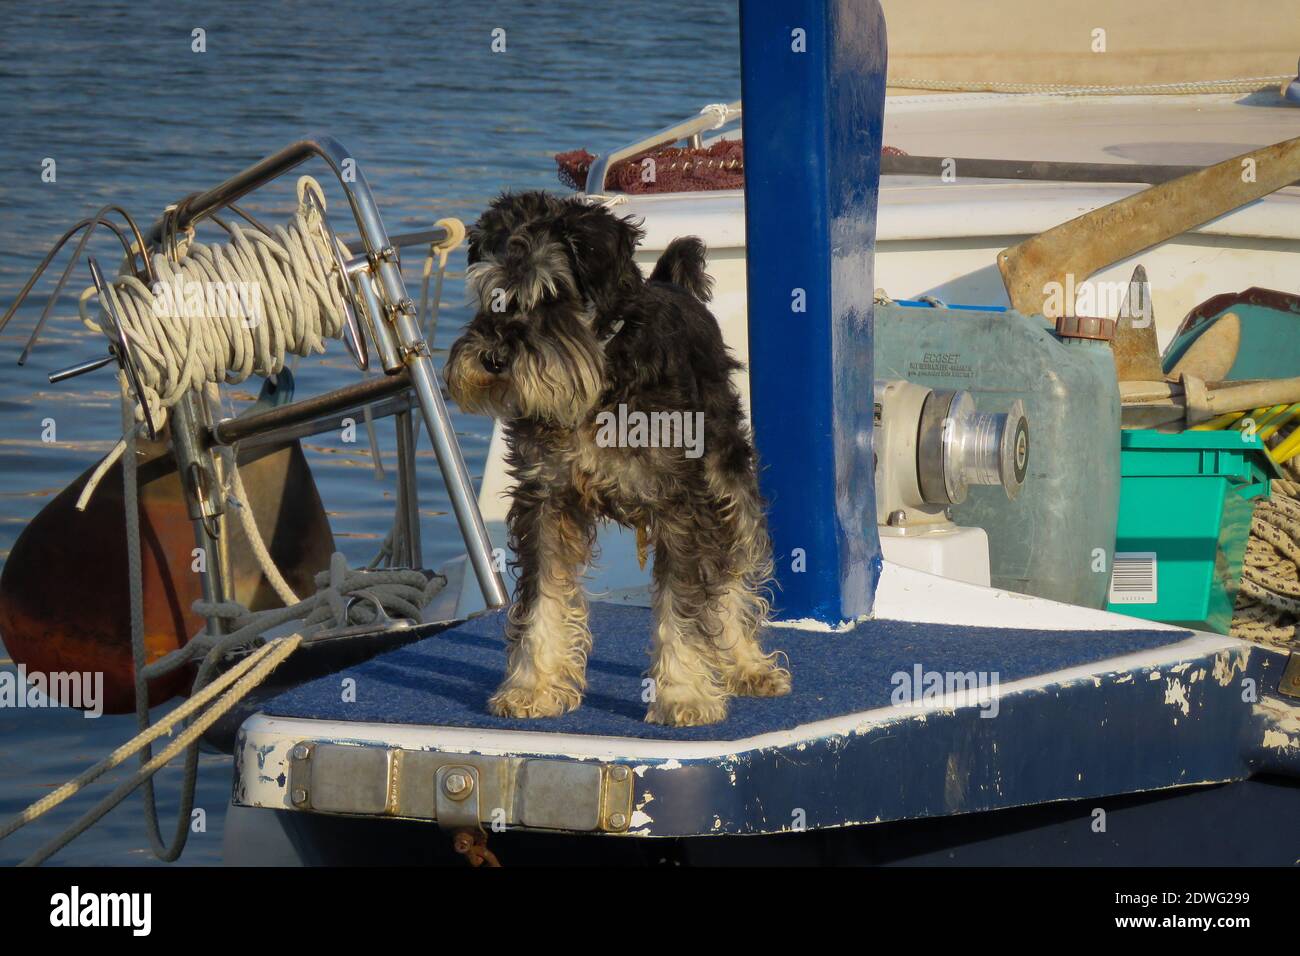 View Of Dog On Boat Stock Photo